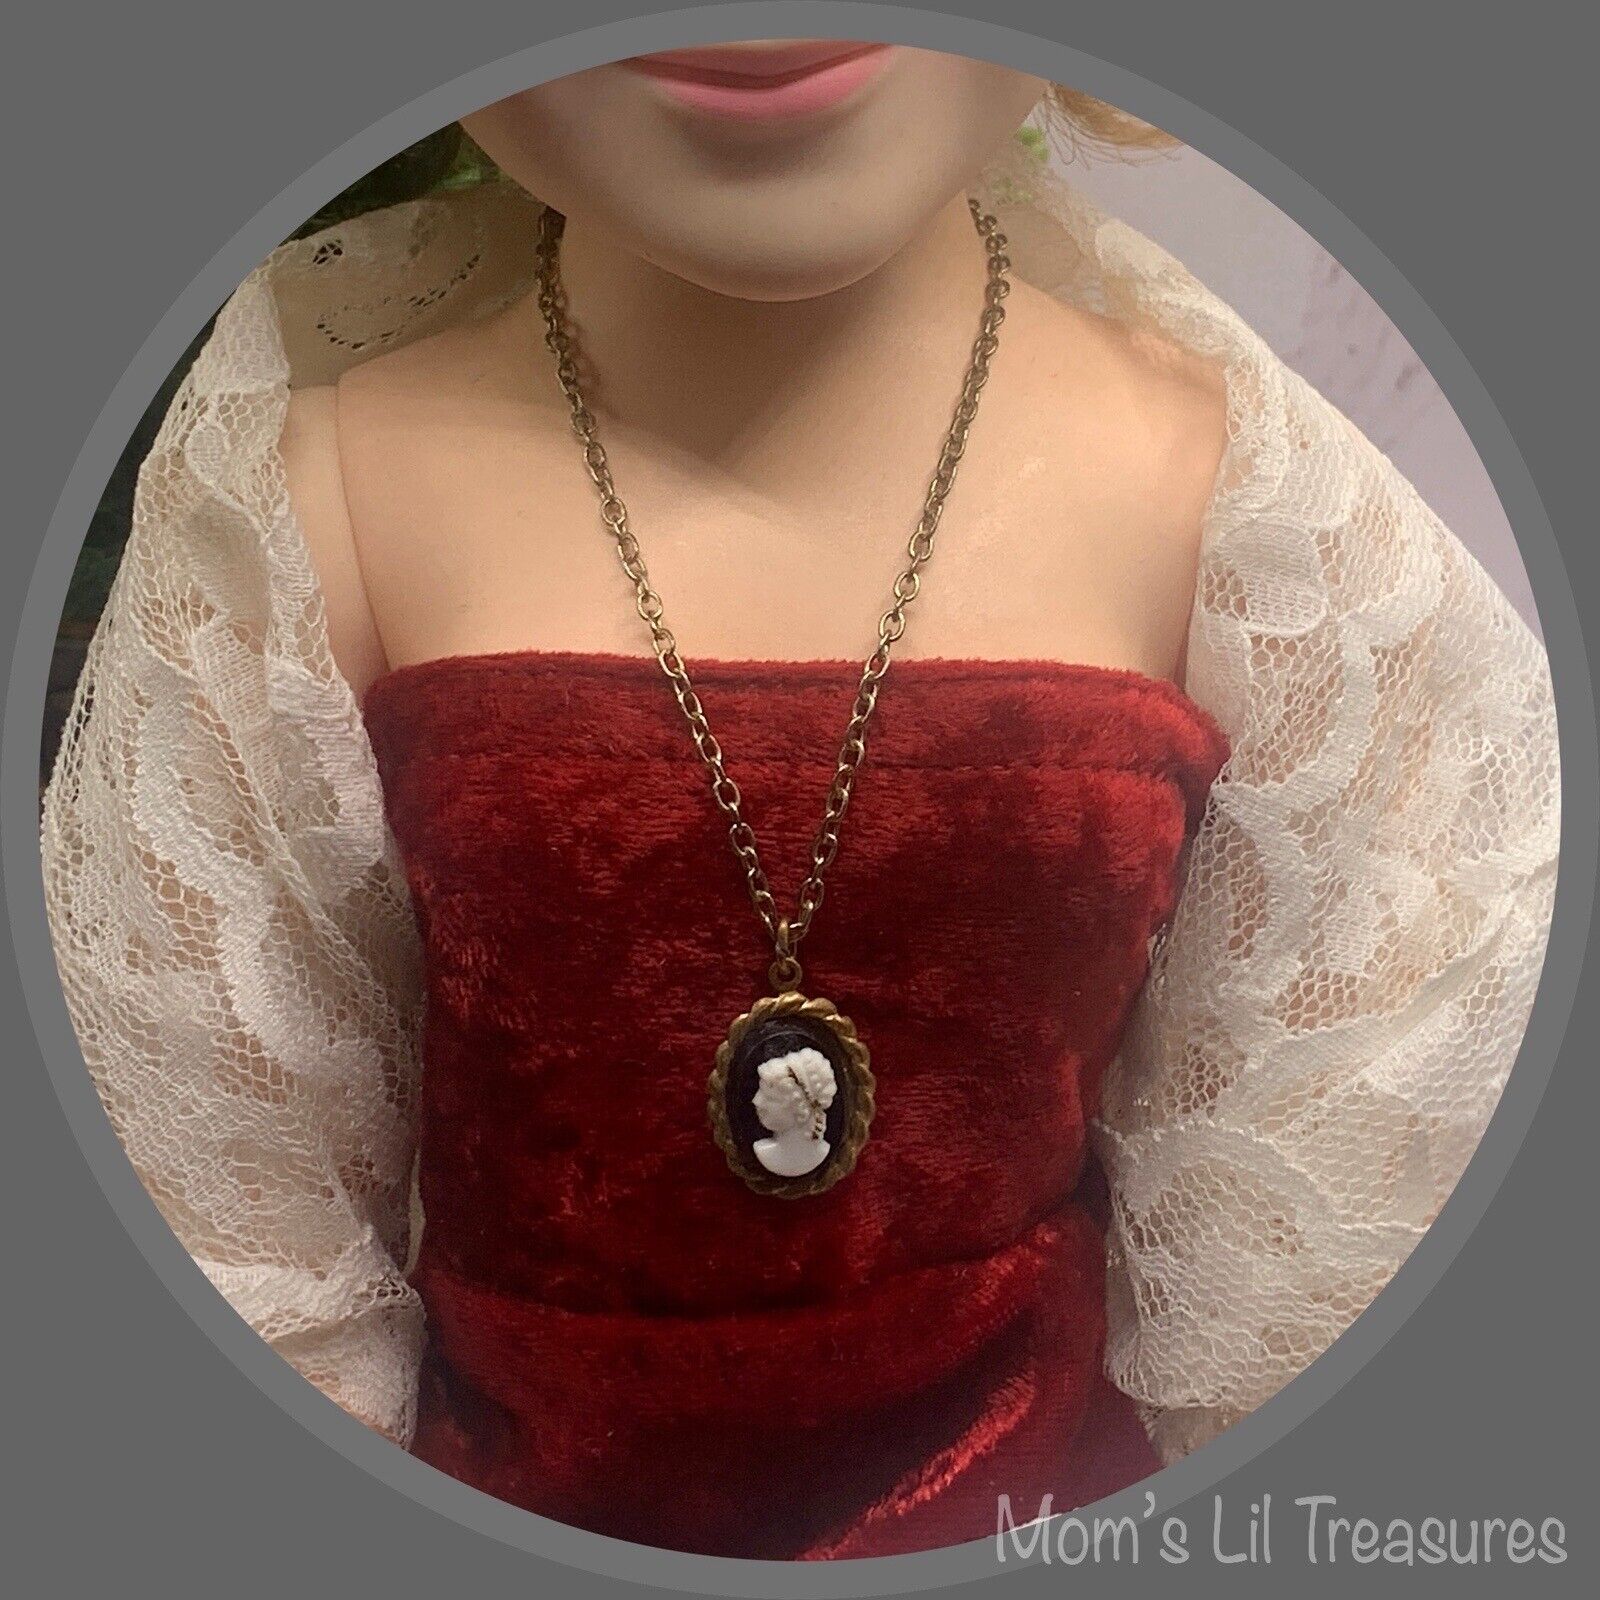 18-20 Inch Vintage Doll Jewelry Black Cameo Vintage Style Doll Necklace